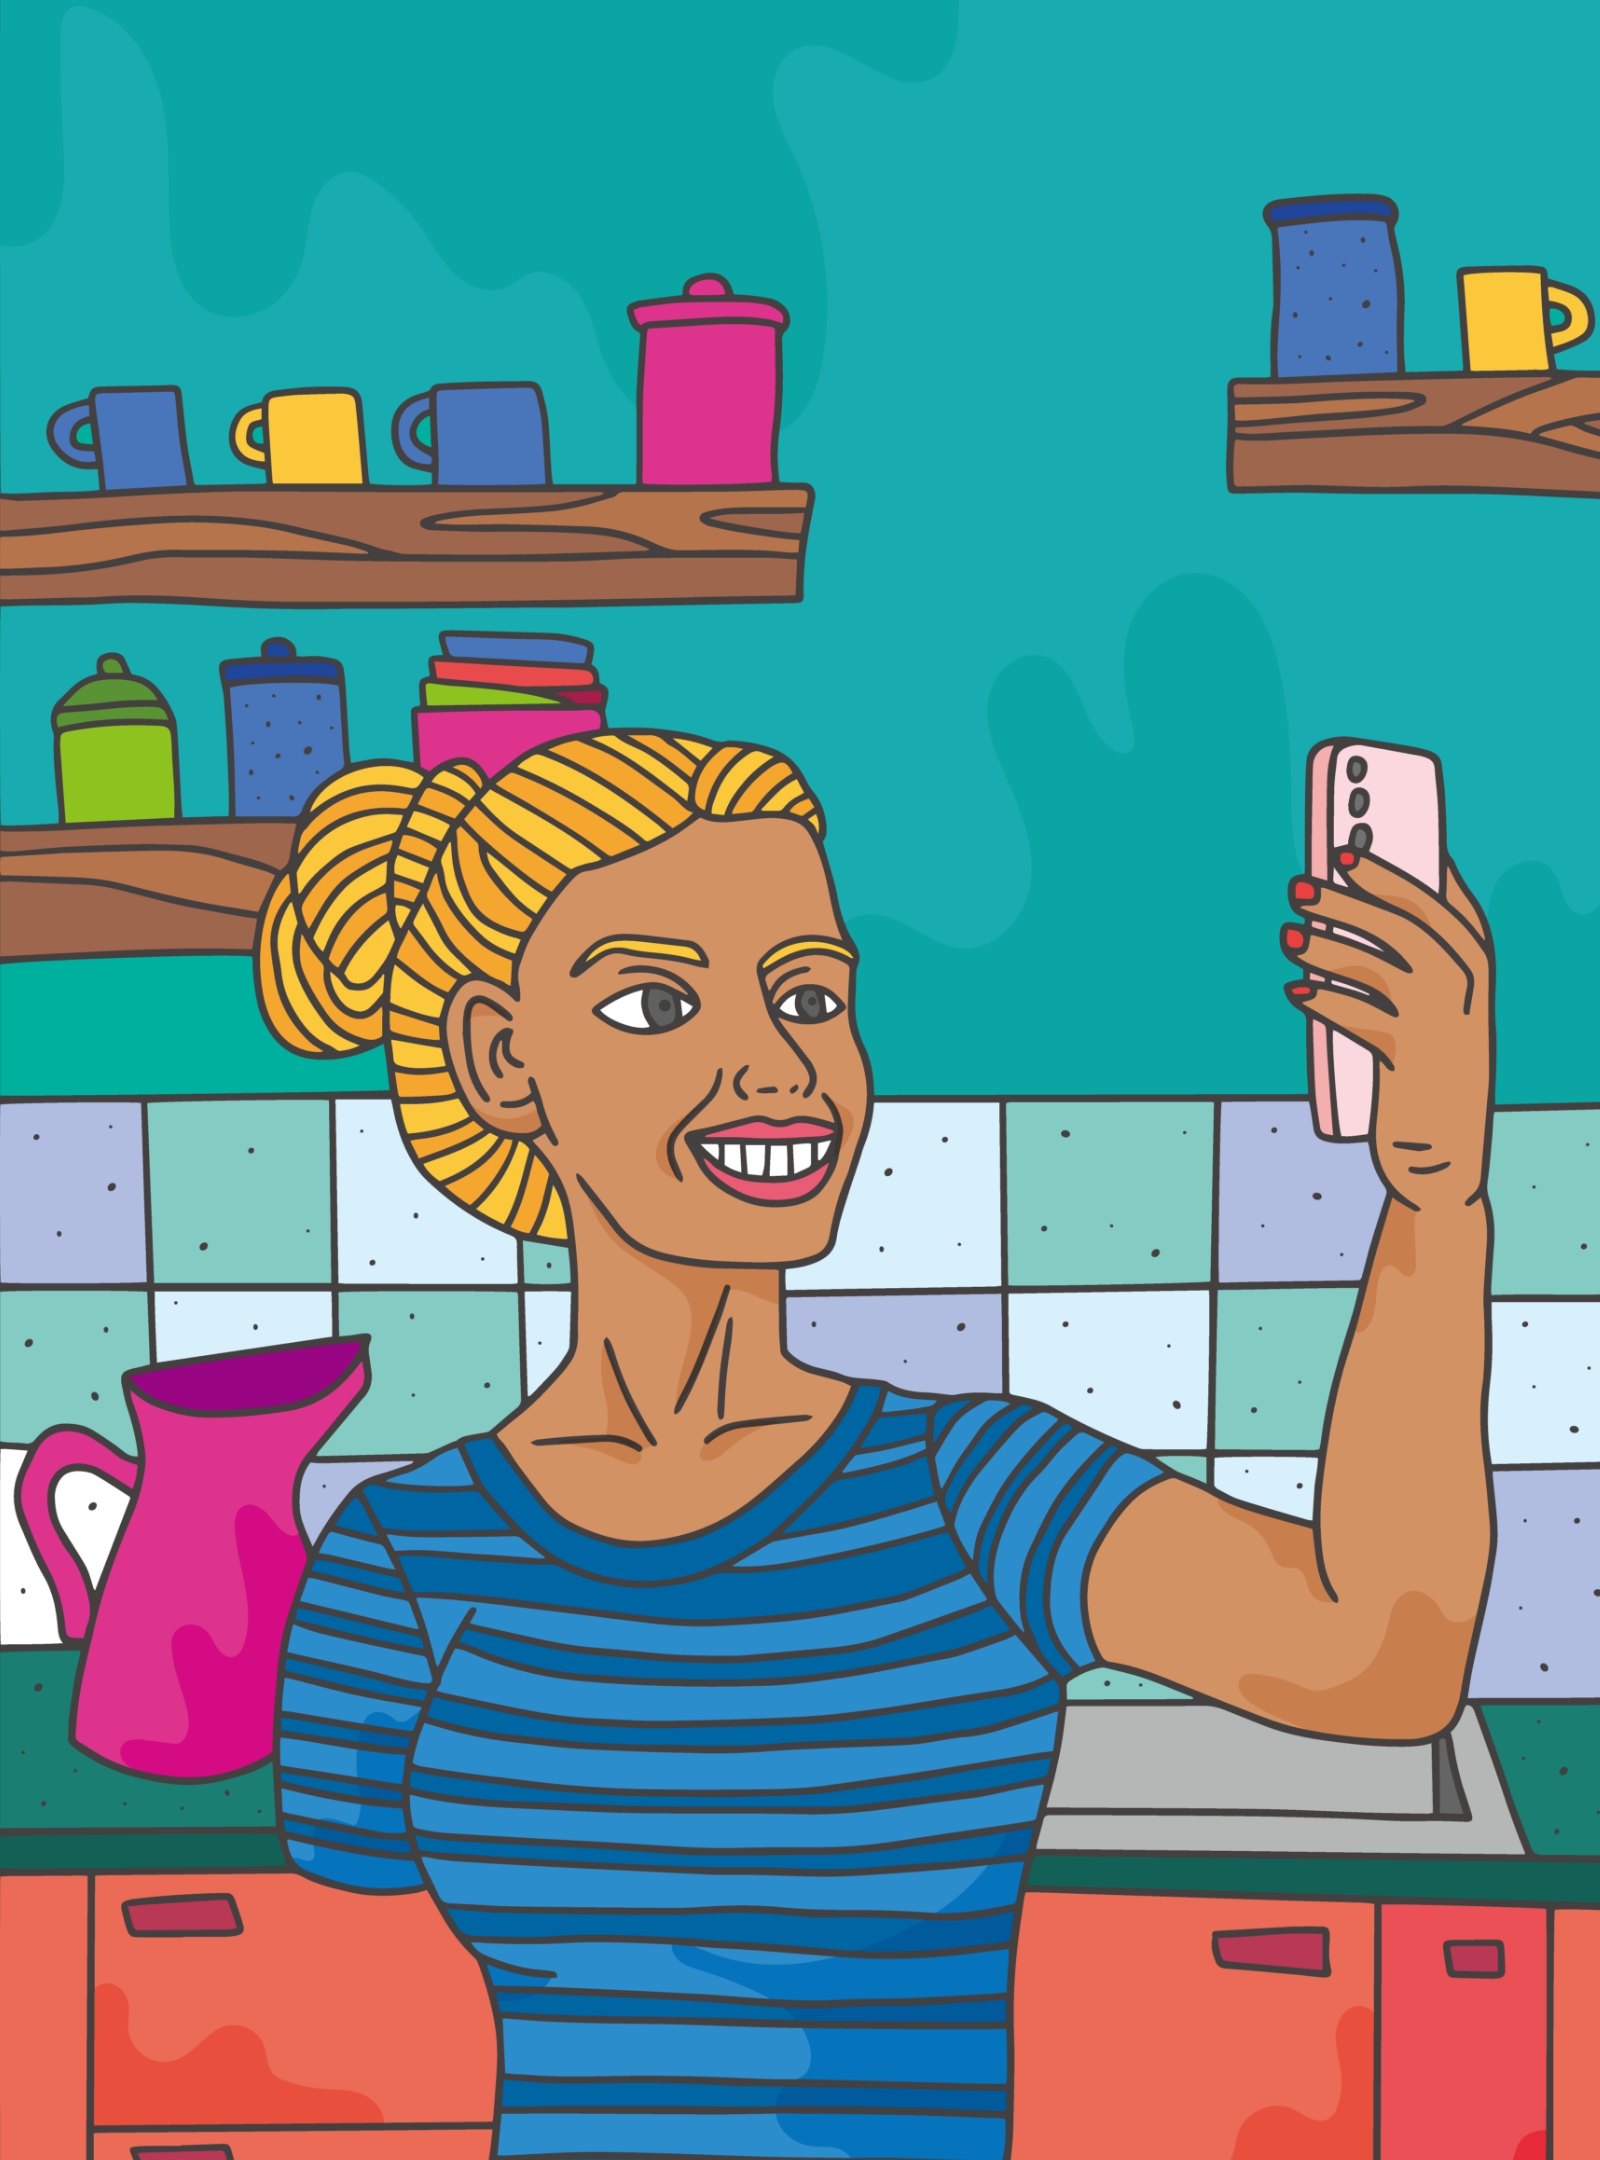 Woman with one arm holds up a Galaxy smartphone, so she can use Assistant menu to take a selfie in the kitchen.
